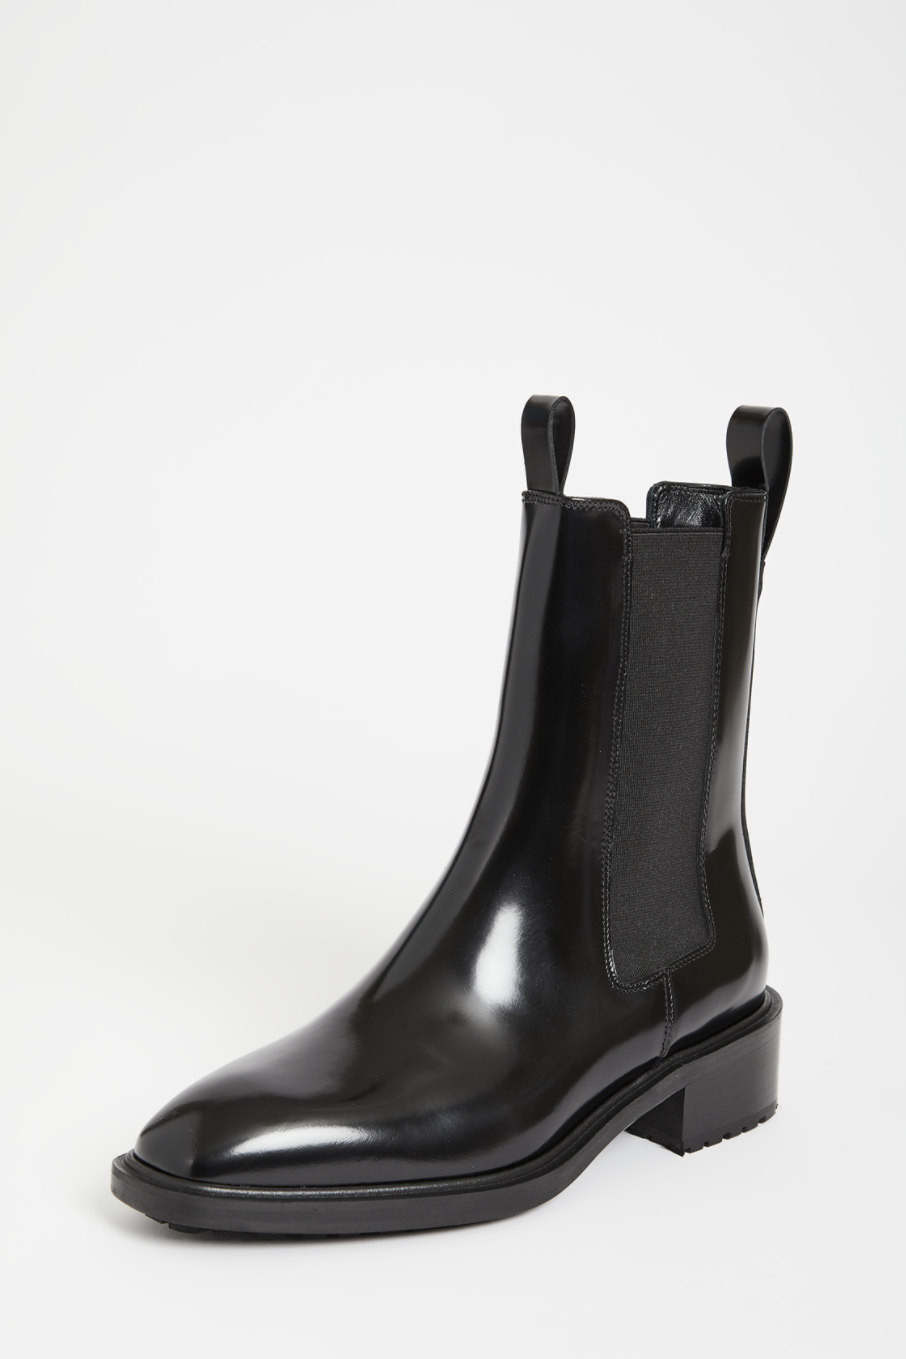 Best Chelsea Boots for Women 2021: Chelsea Boots to Buy Now